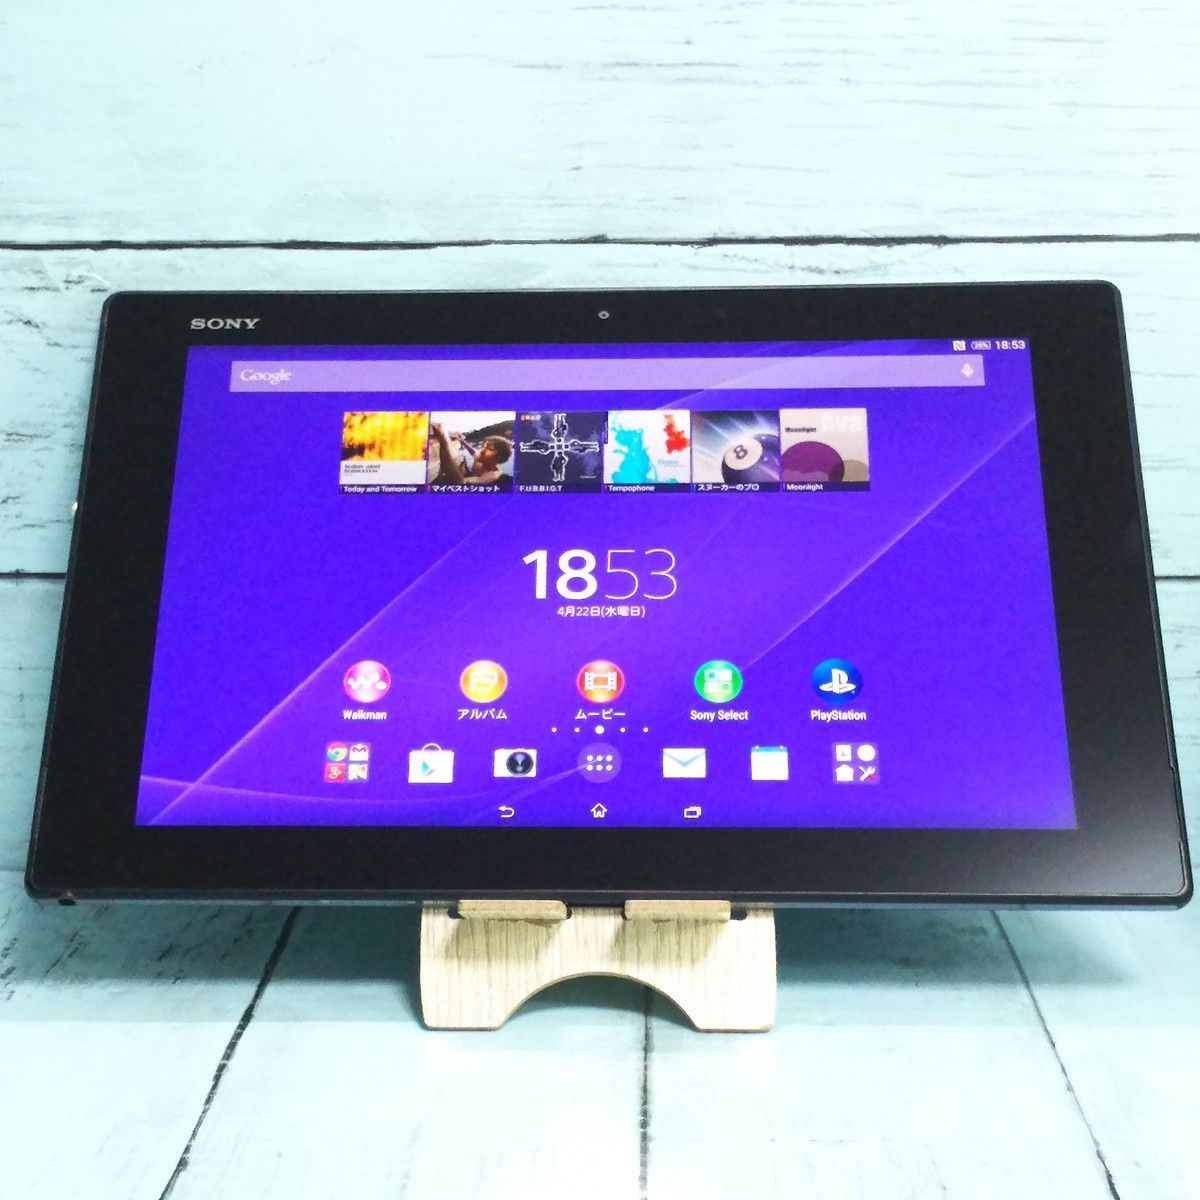 SONY Xperia Z2 Android Tablet Wi-Fi SGP512 本体 479959 - メルカリ